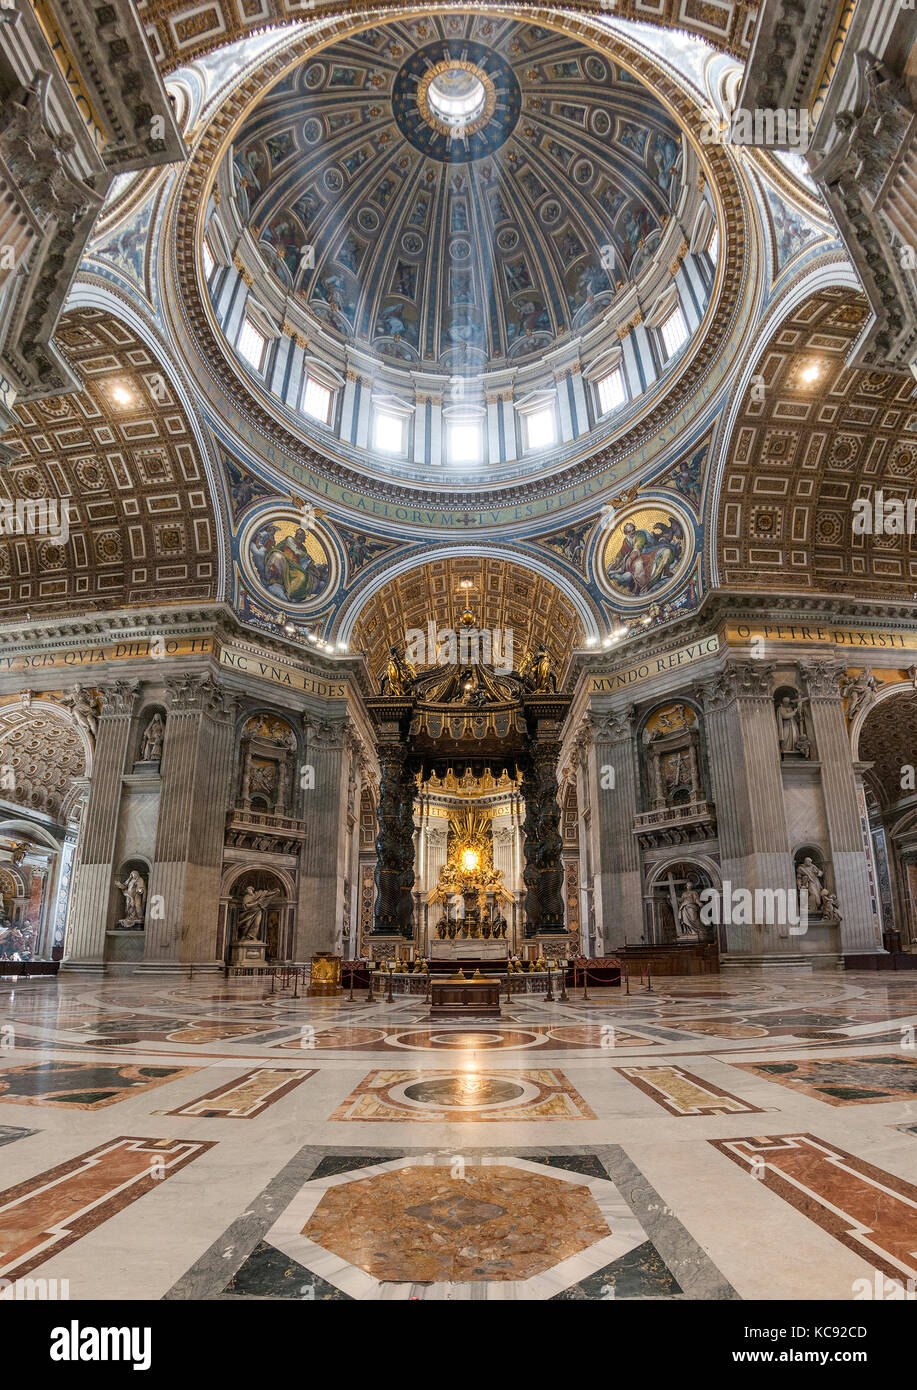 Interior and dome of St Peter's Basilica in the Vatican City in Rome. Stock Photo